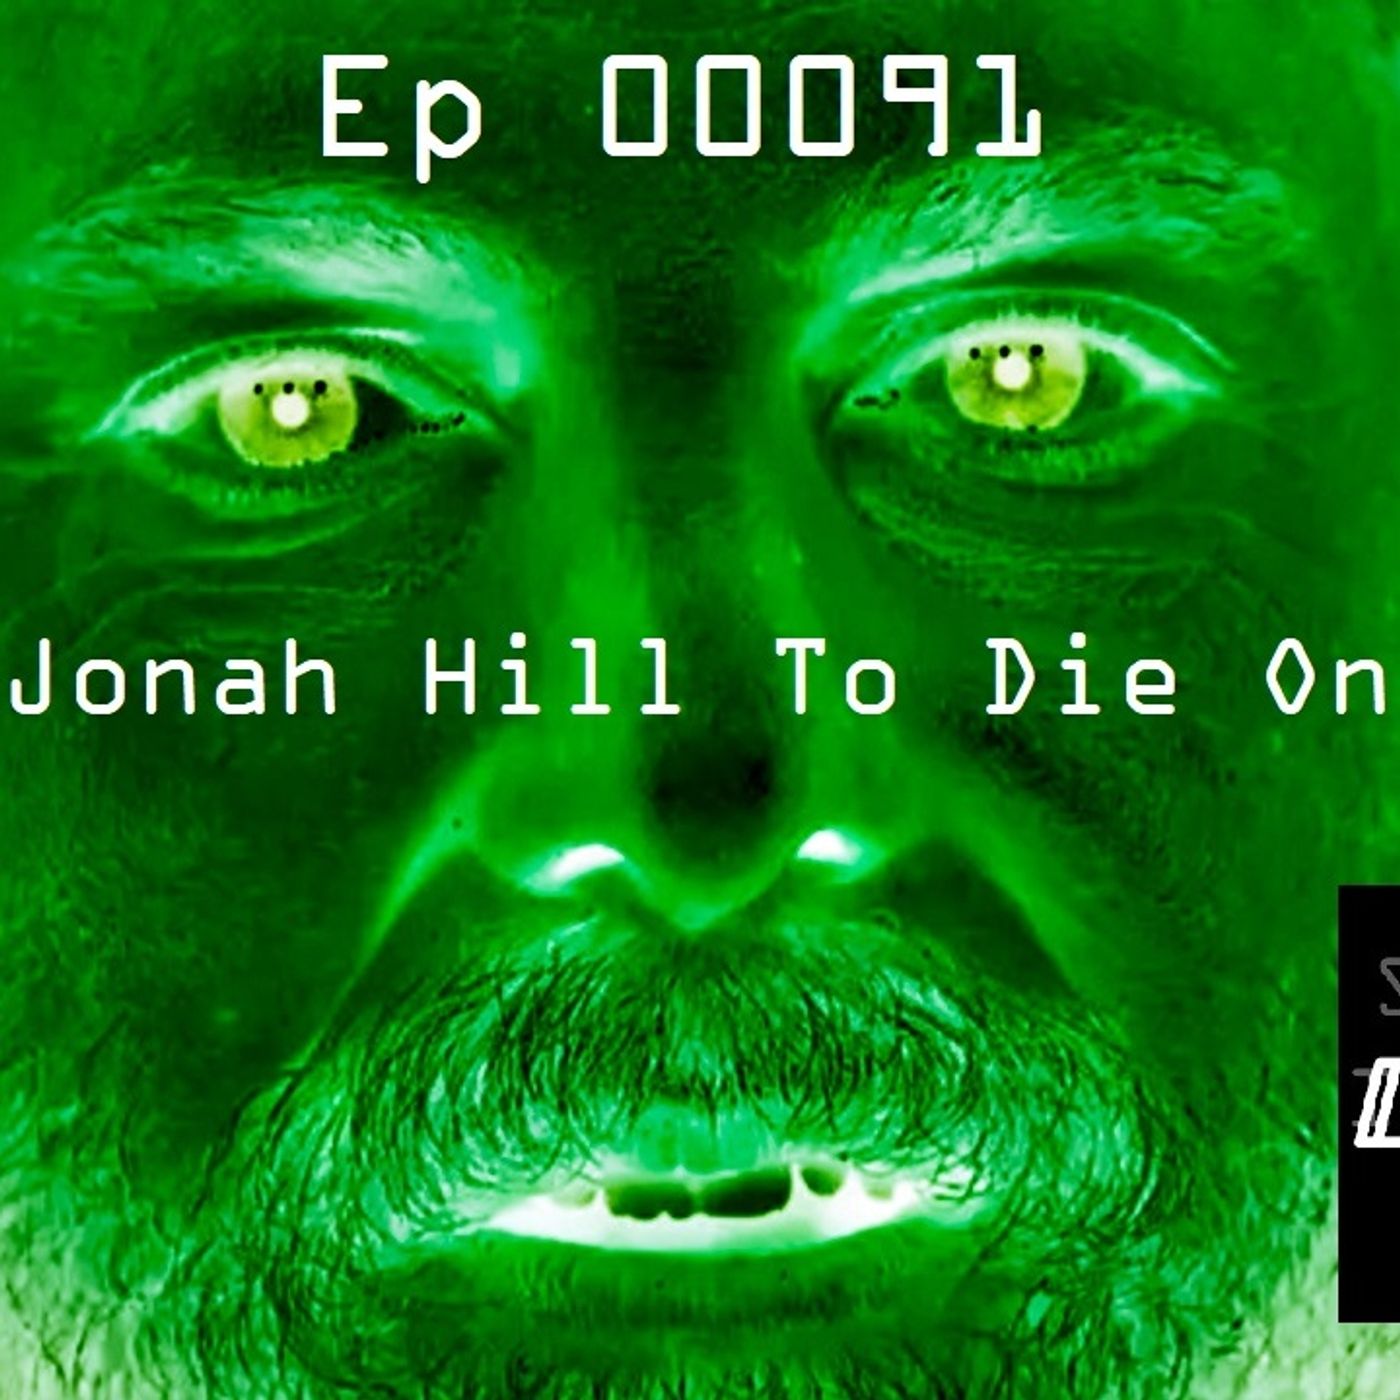 Ep 00091 - A Jonah Hill To Die On